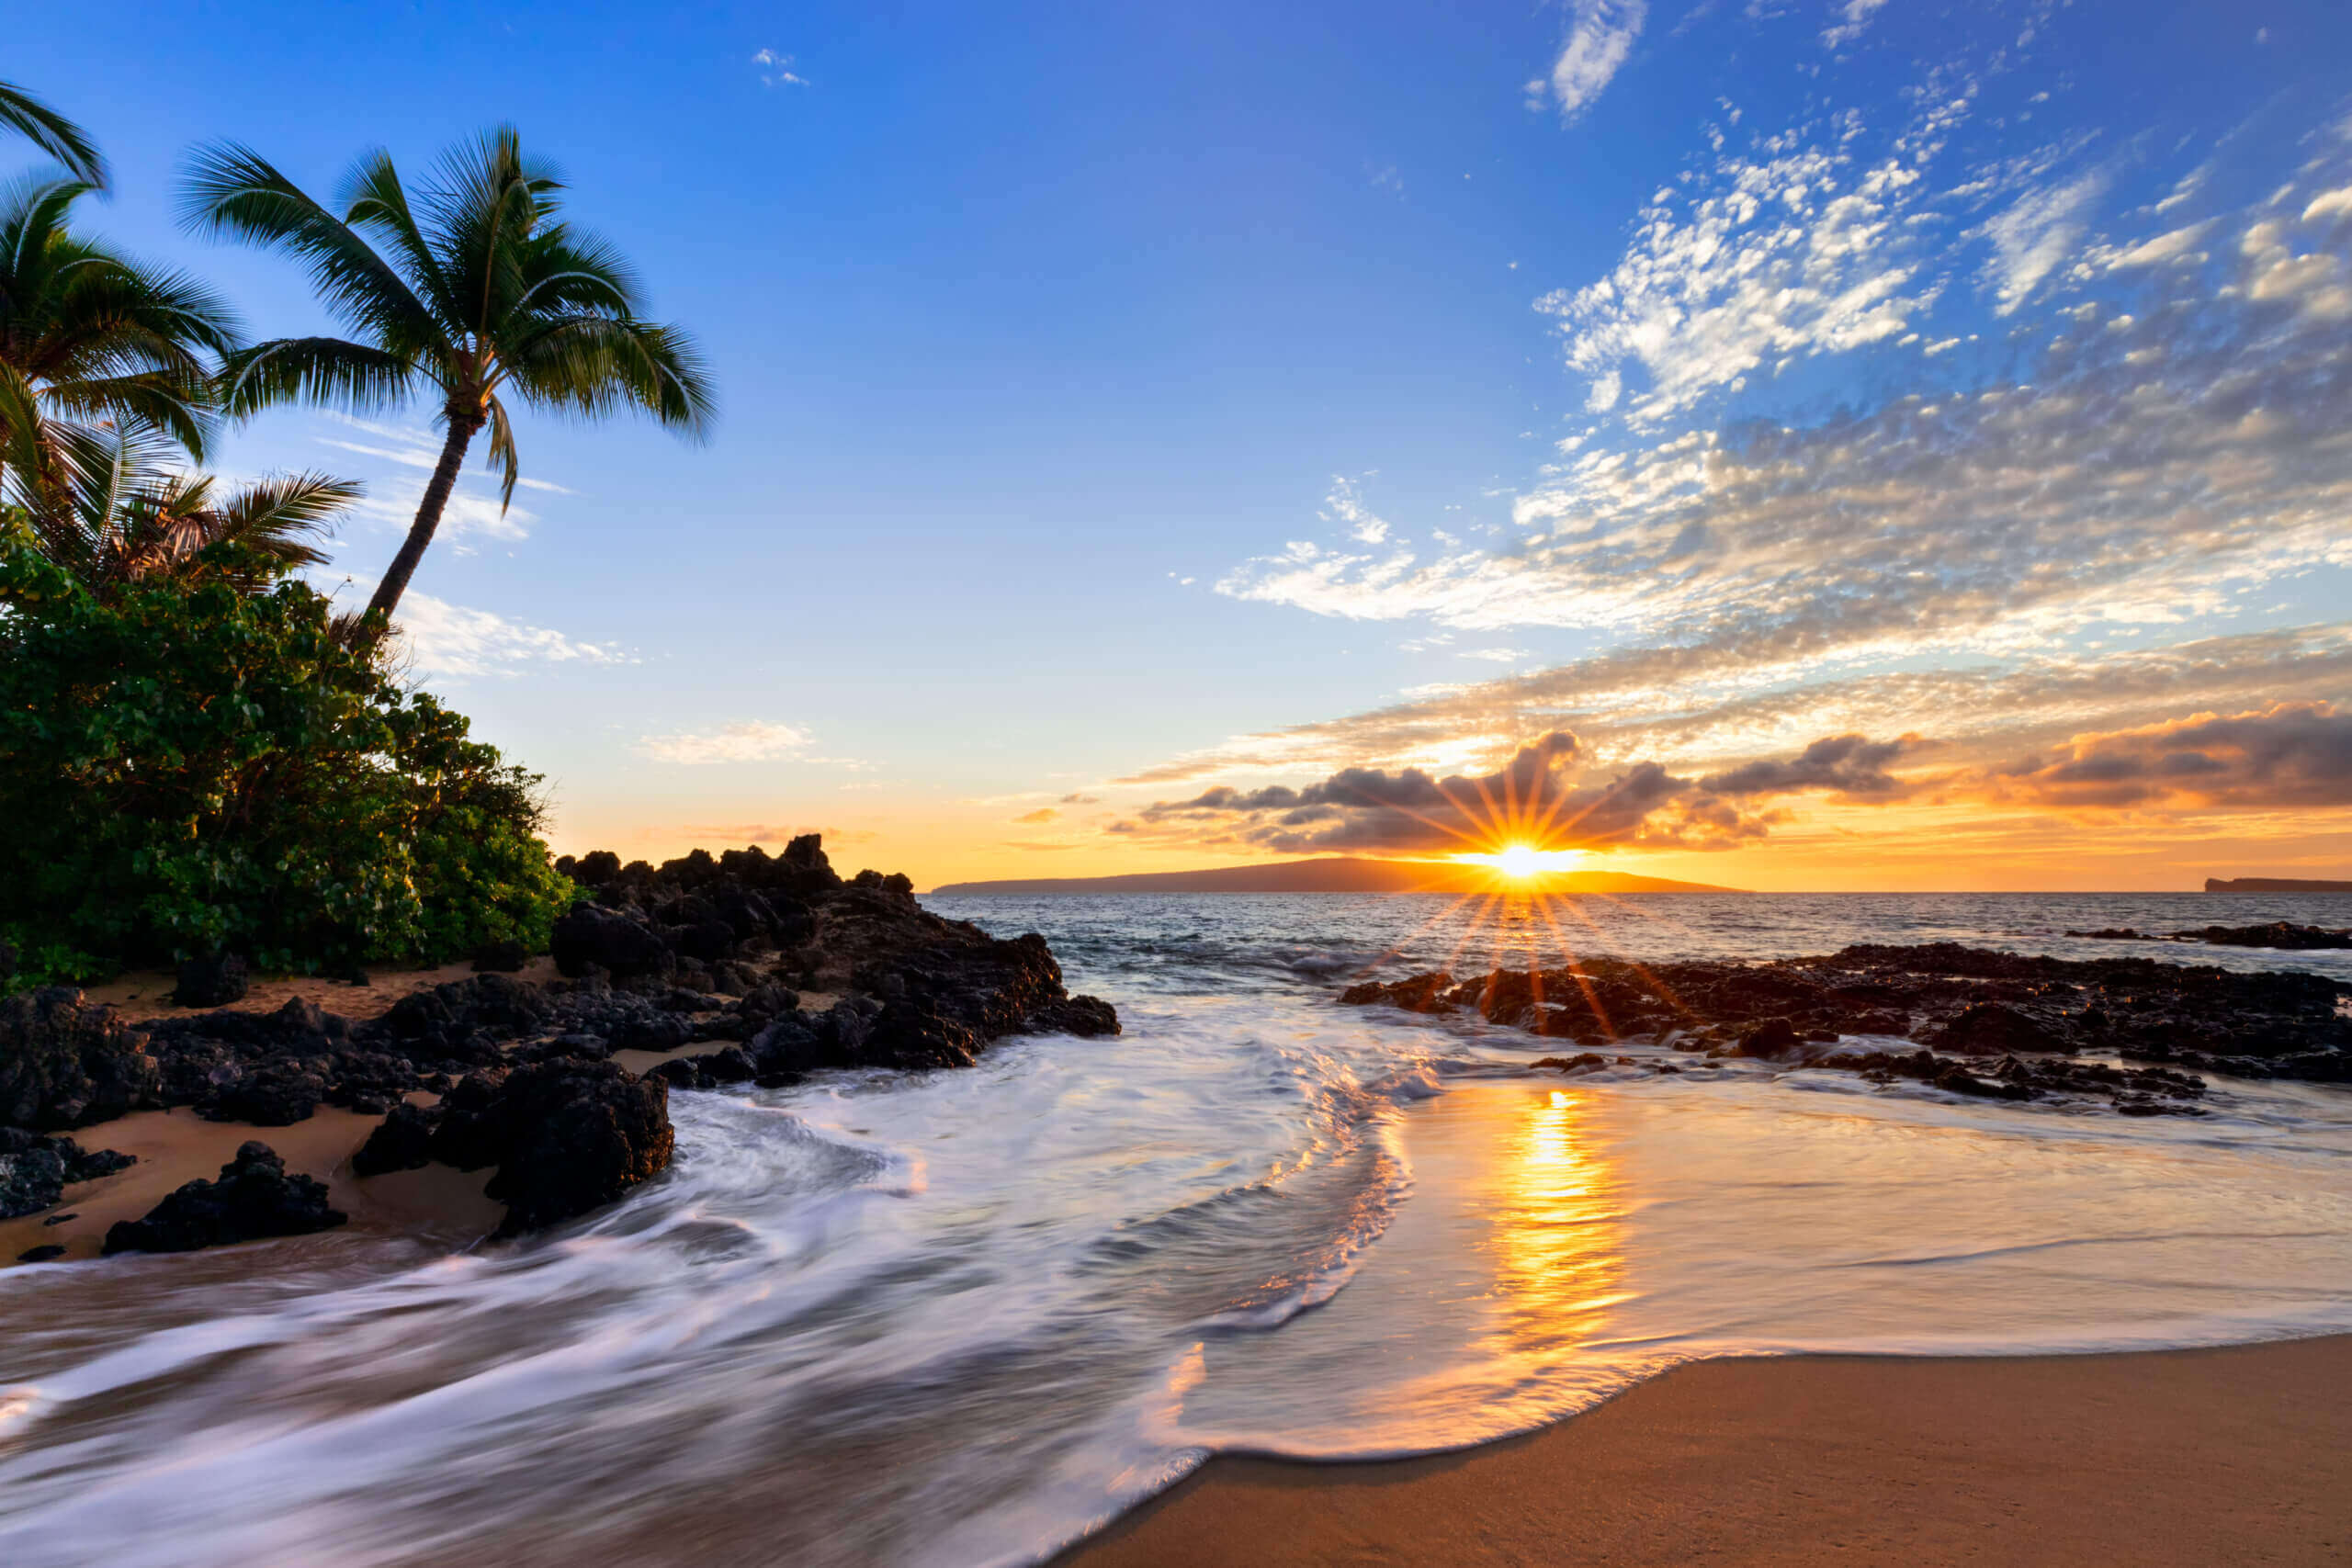 Palm trees and the beach in Hawaii at sunset